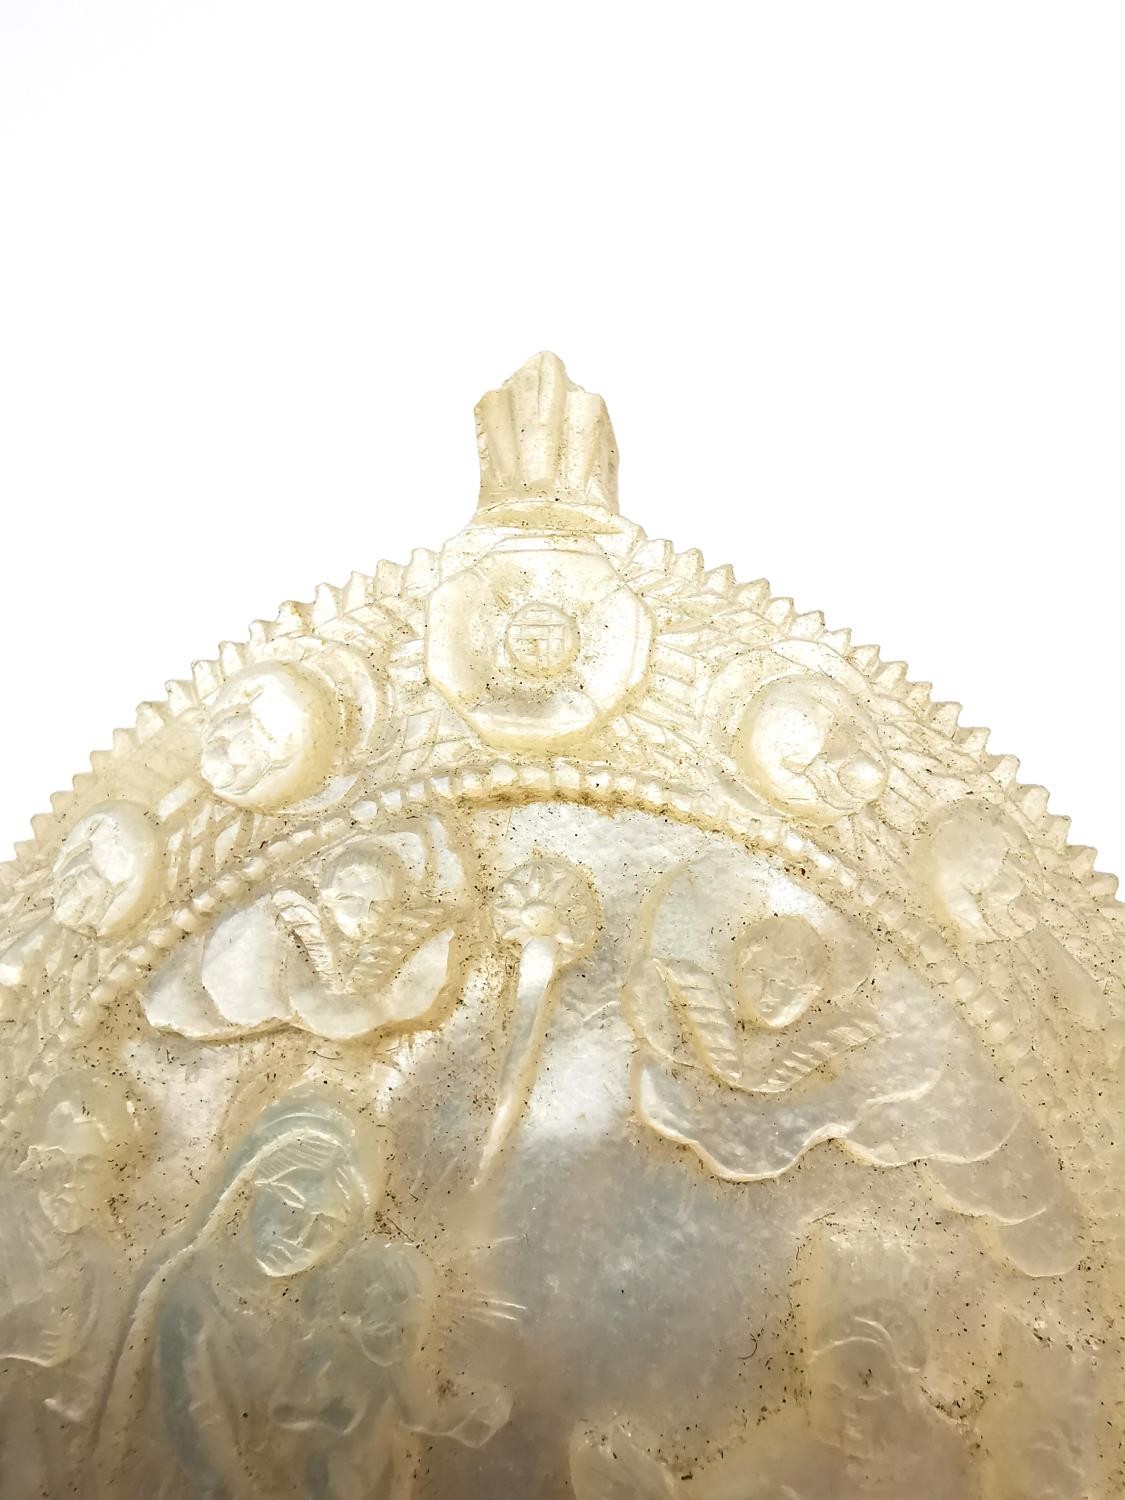 Two 19th century carved mother of pearl religious medallions depicting The Annunciation, Holy Land - Image 10 of 11